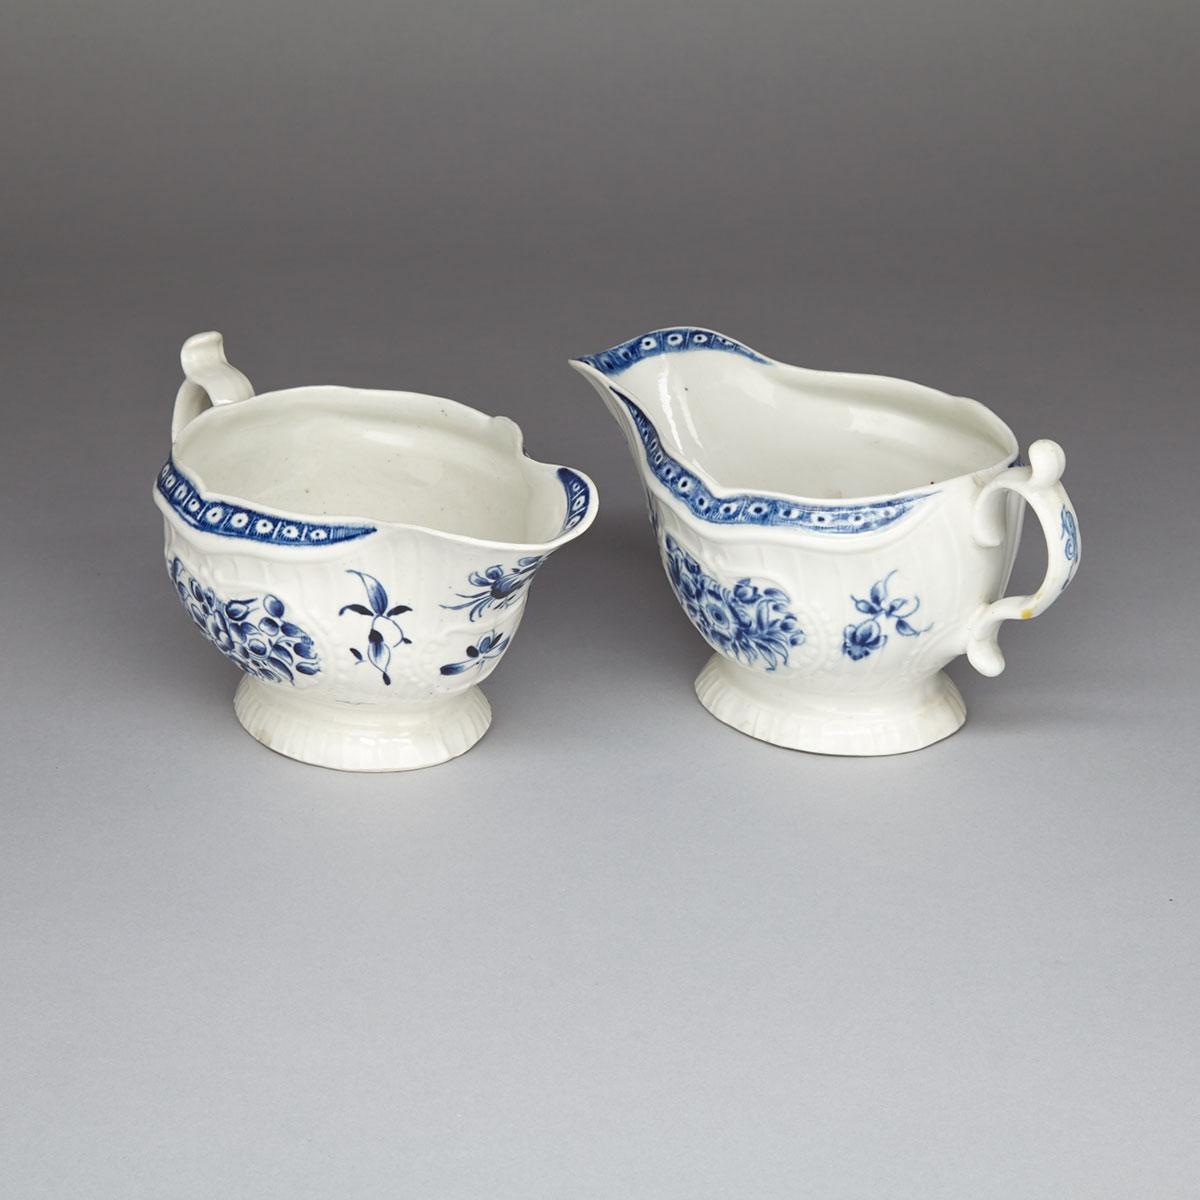 Pair of Worcester Strap Fluted Floral Pattern Sauce Boats, c.1775